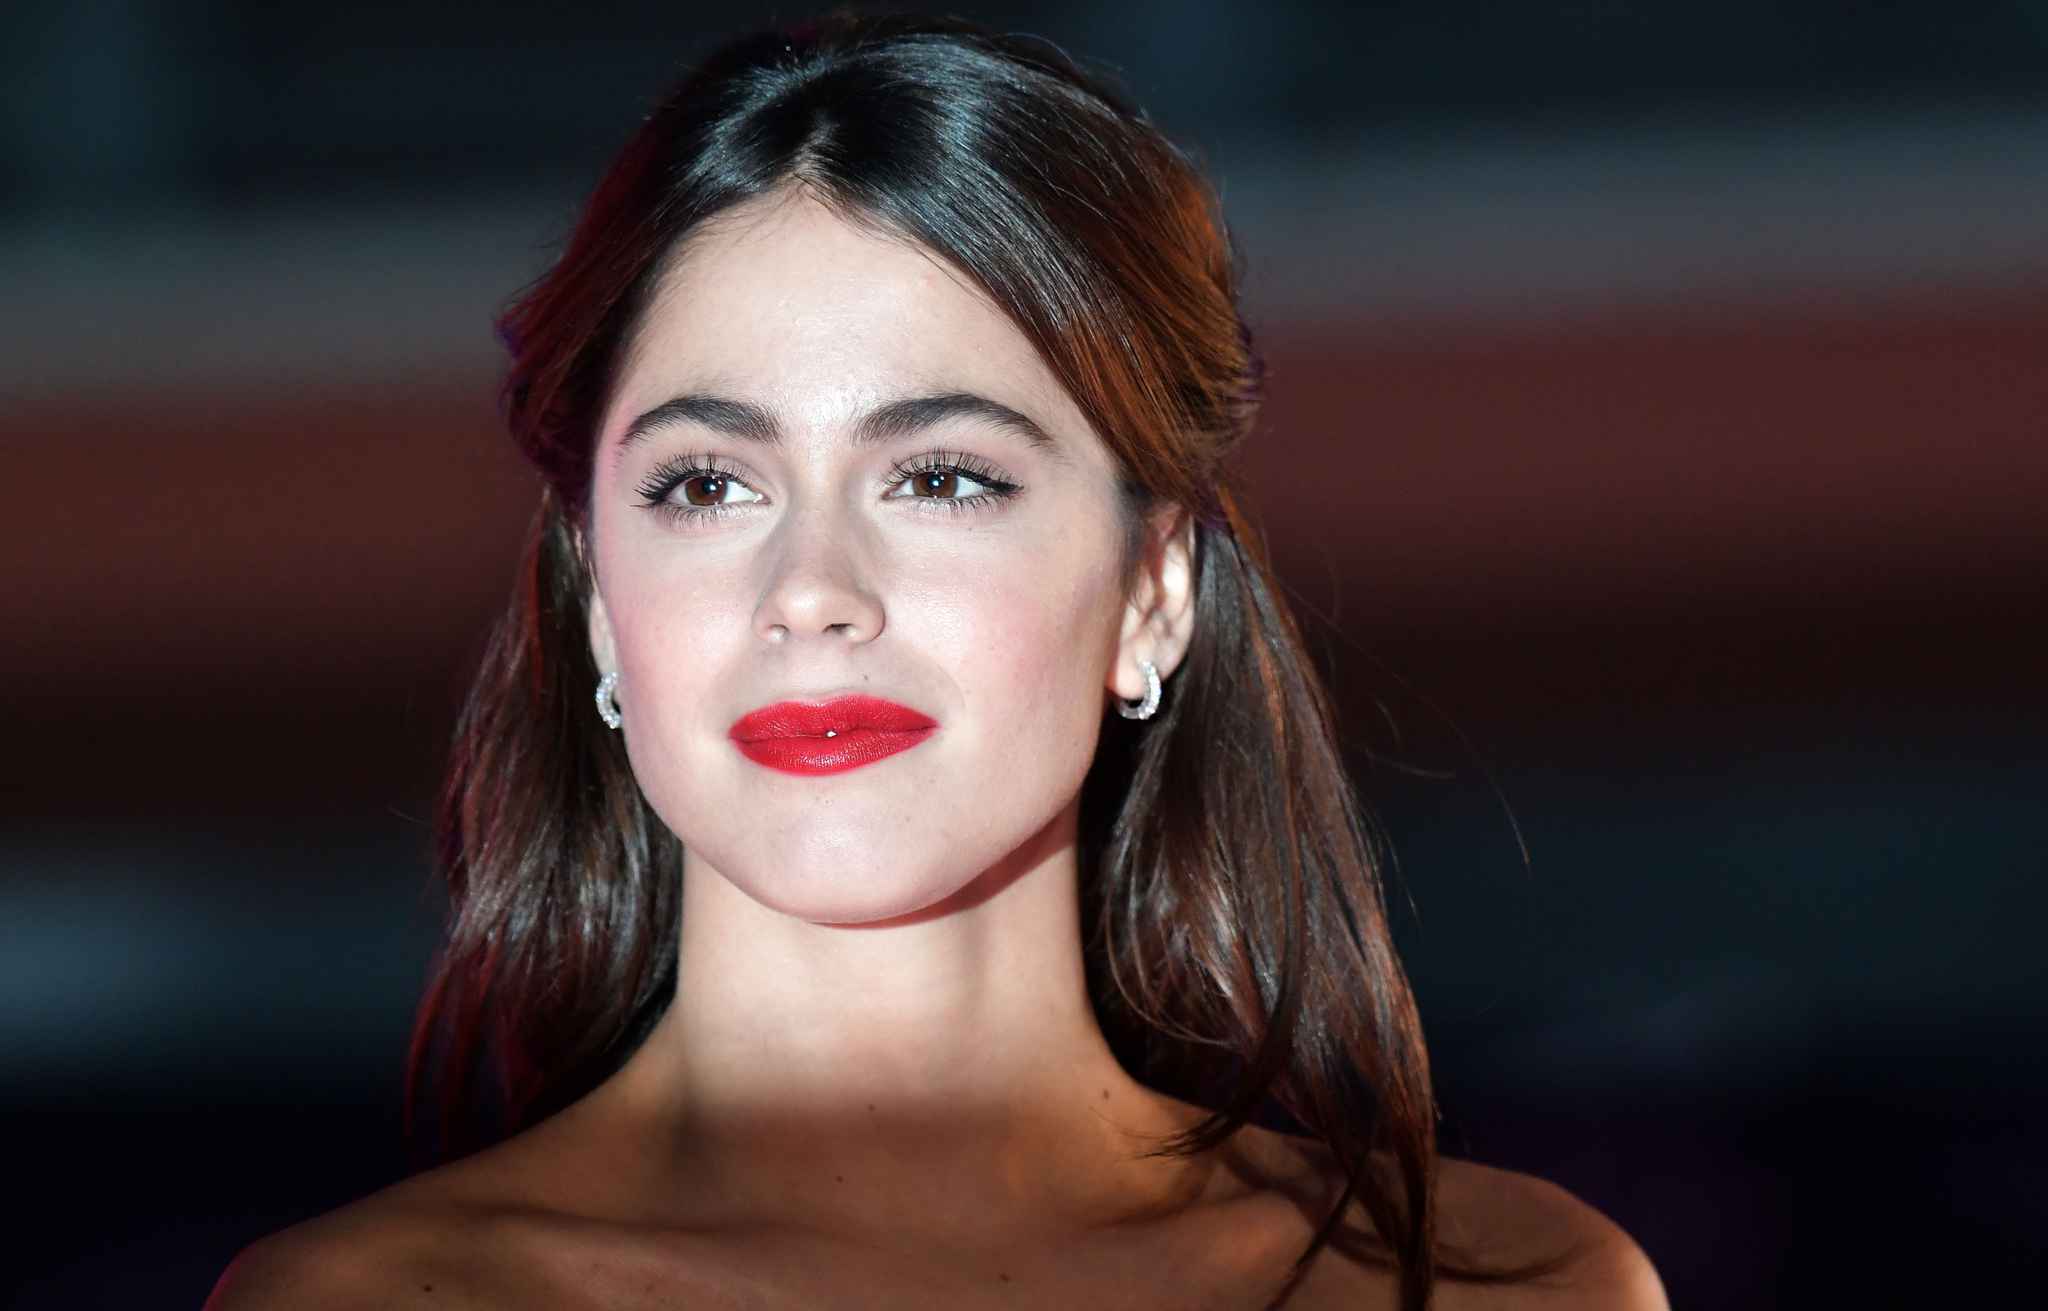 Martina Stoessel Wallpaper Image Photo Picture Background